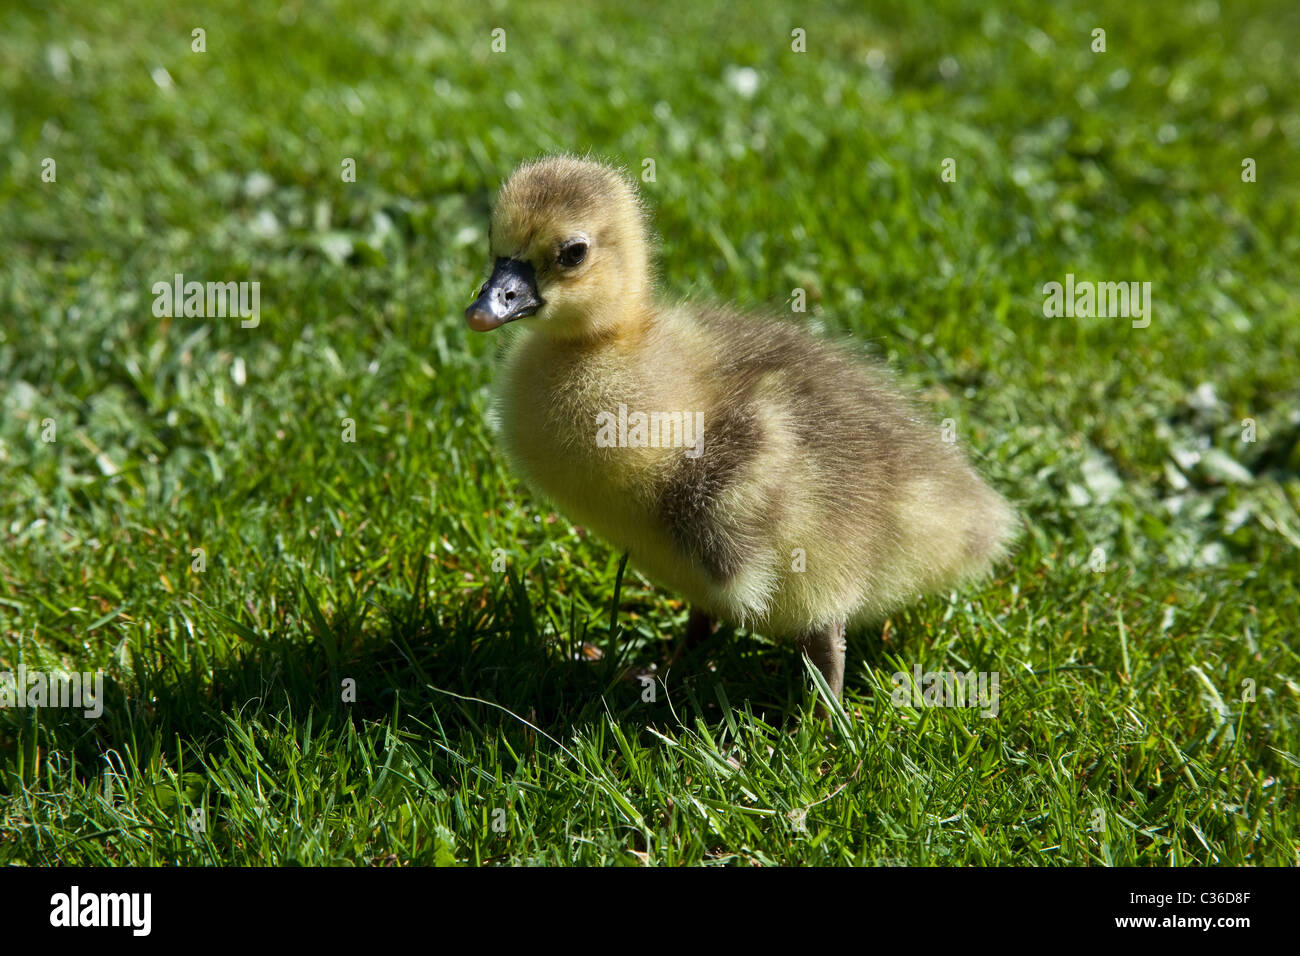 Baby Toulouse geese or gosling's on grass, Hampshire, England, United Kingdom. Stock Photo